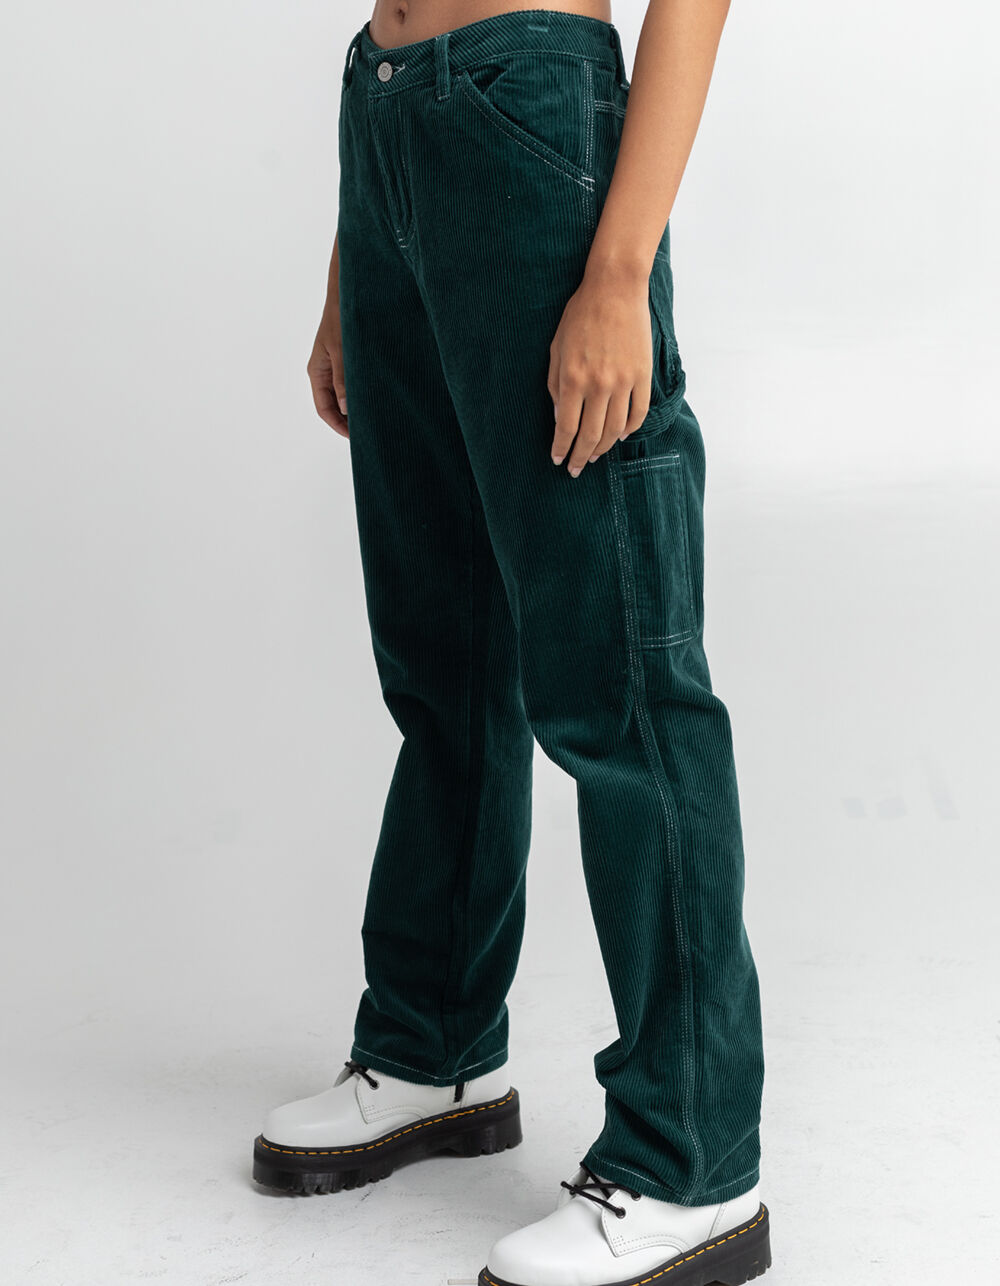 Buy Classic Vintage Mens Corduroy Carpenter Work Pants by Online in India   Etsy